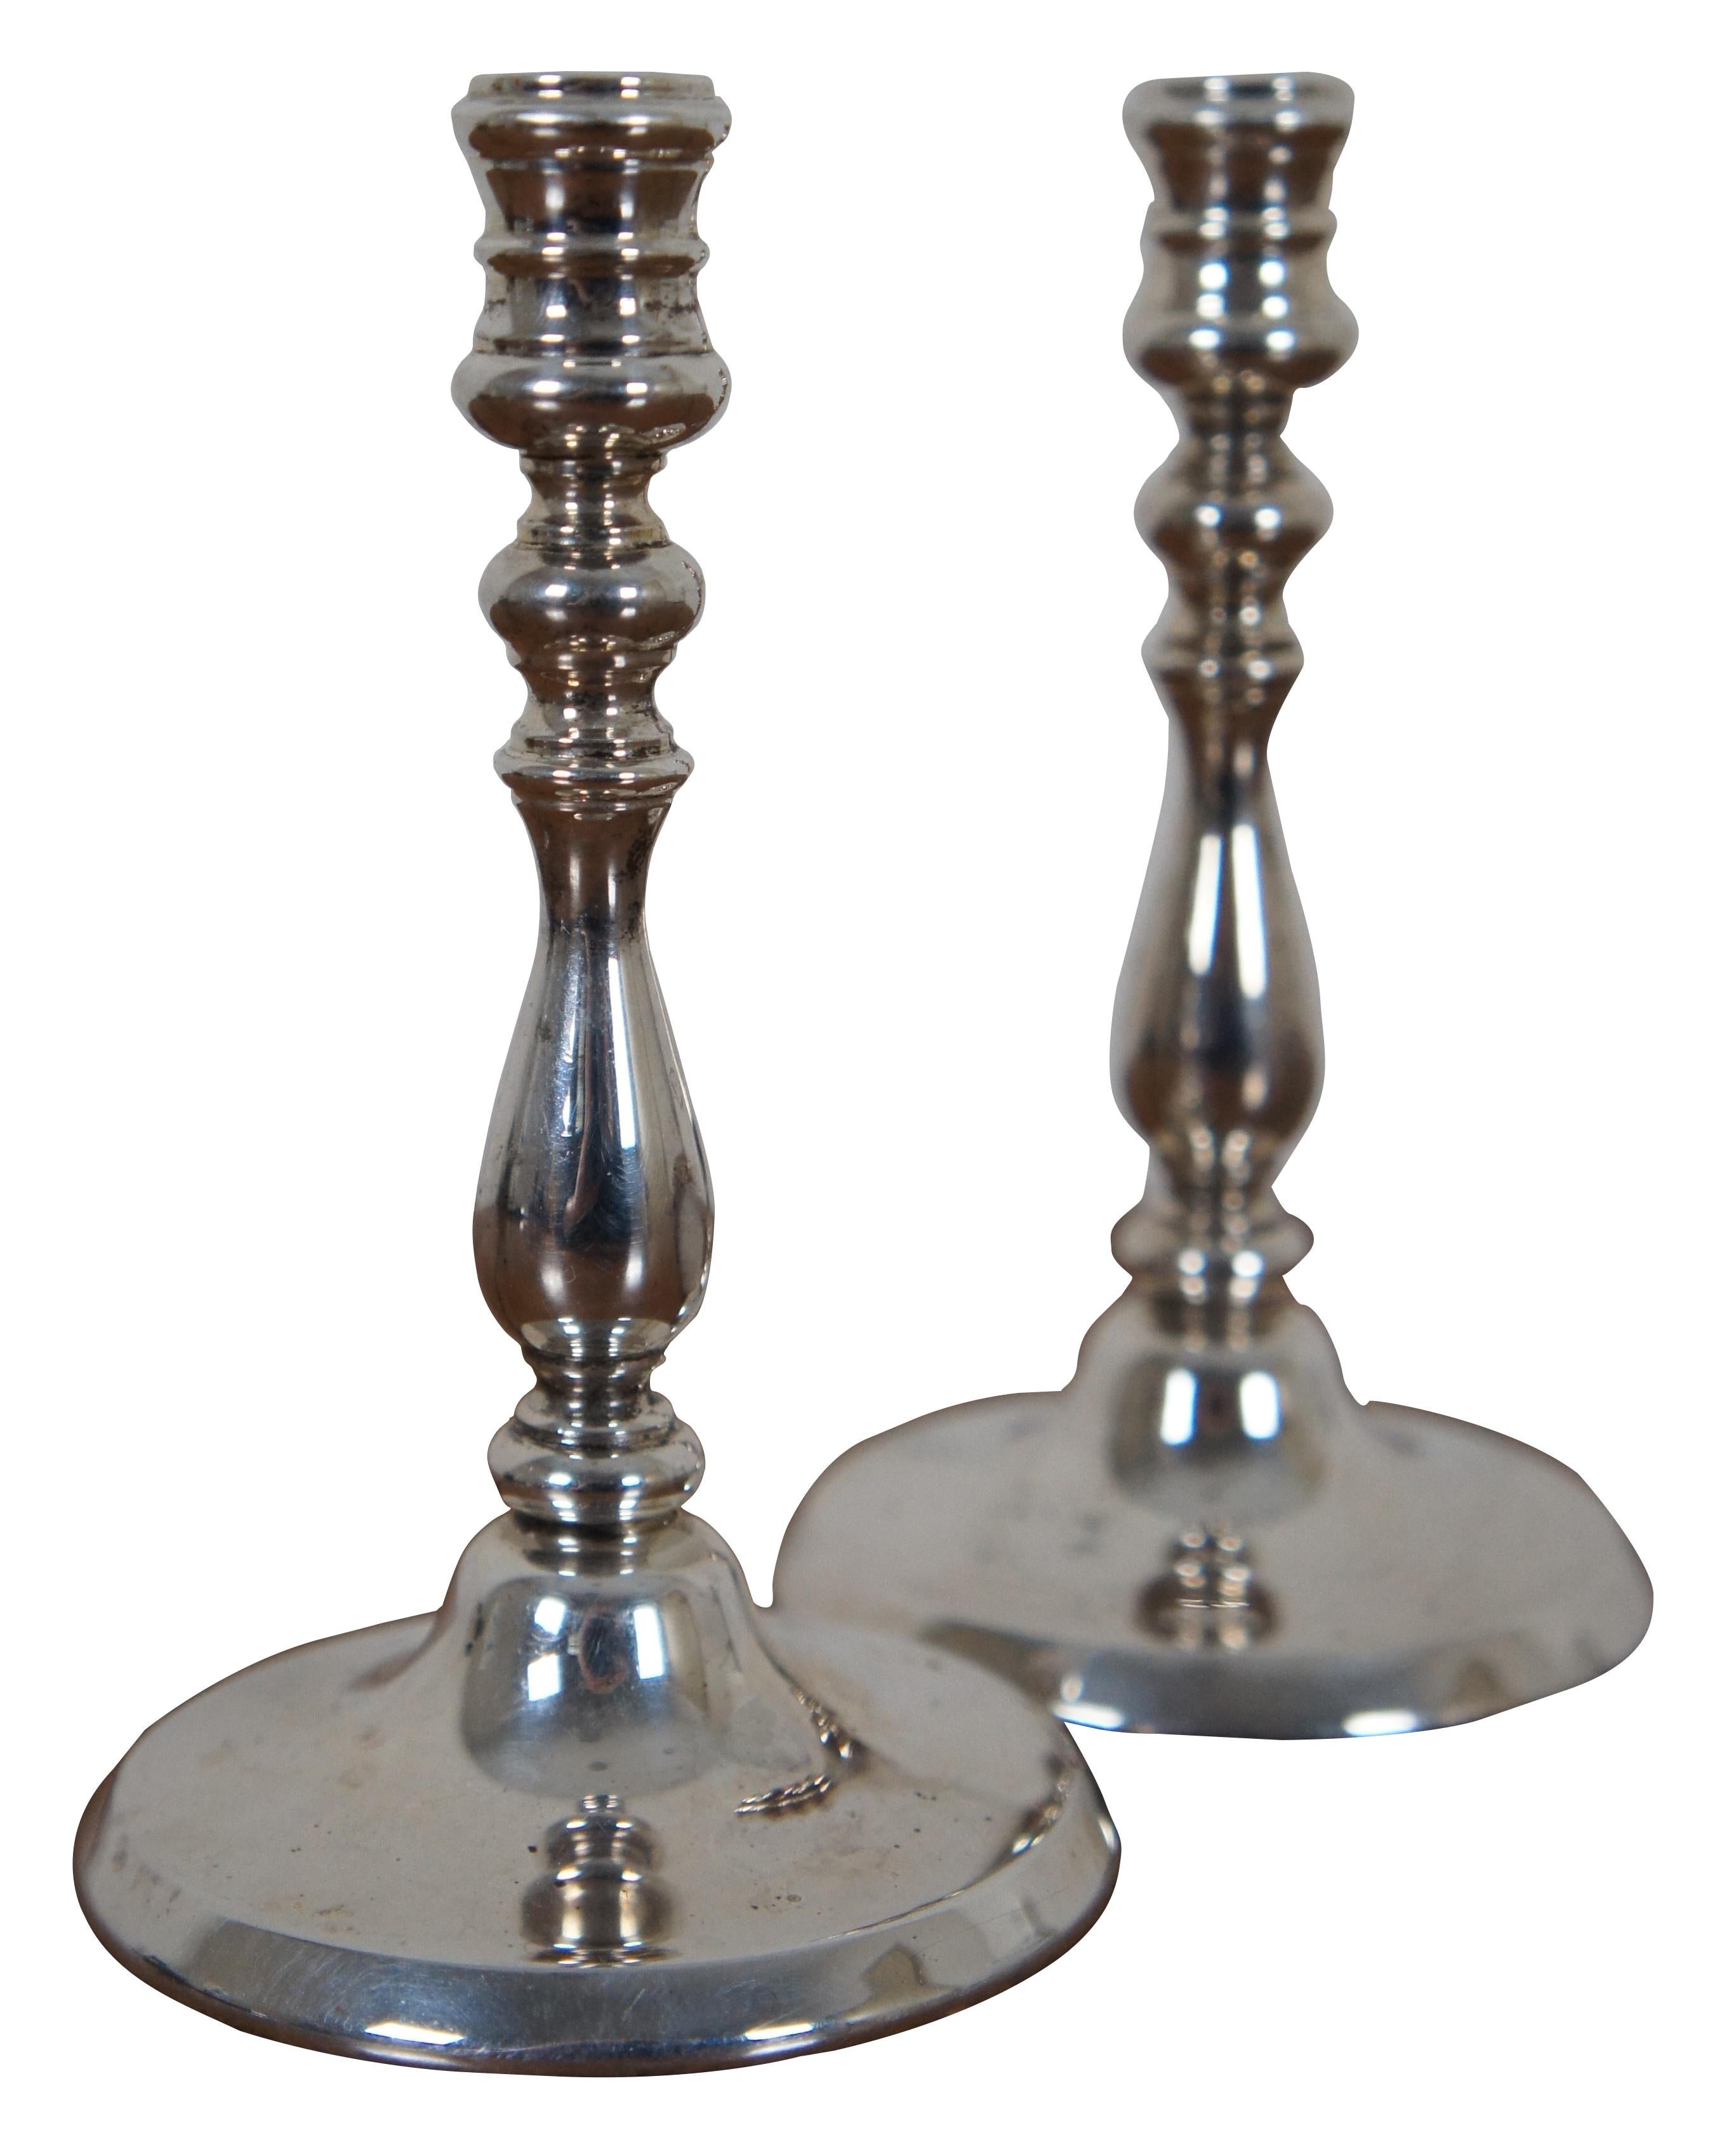 Vintage Tiffany & Co sterling silver miniature taper candlesticks, numbered 16.

Measures: 2.5” x 4.25” / combined weight - 251.5 g (diameter x height).